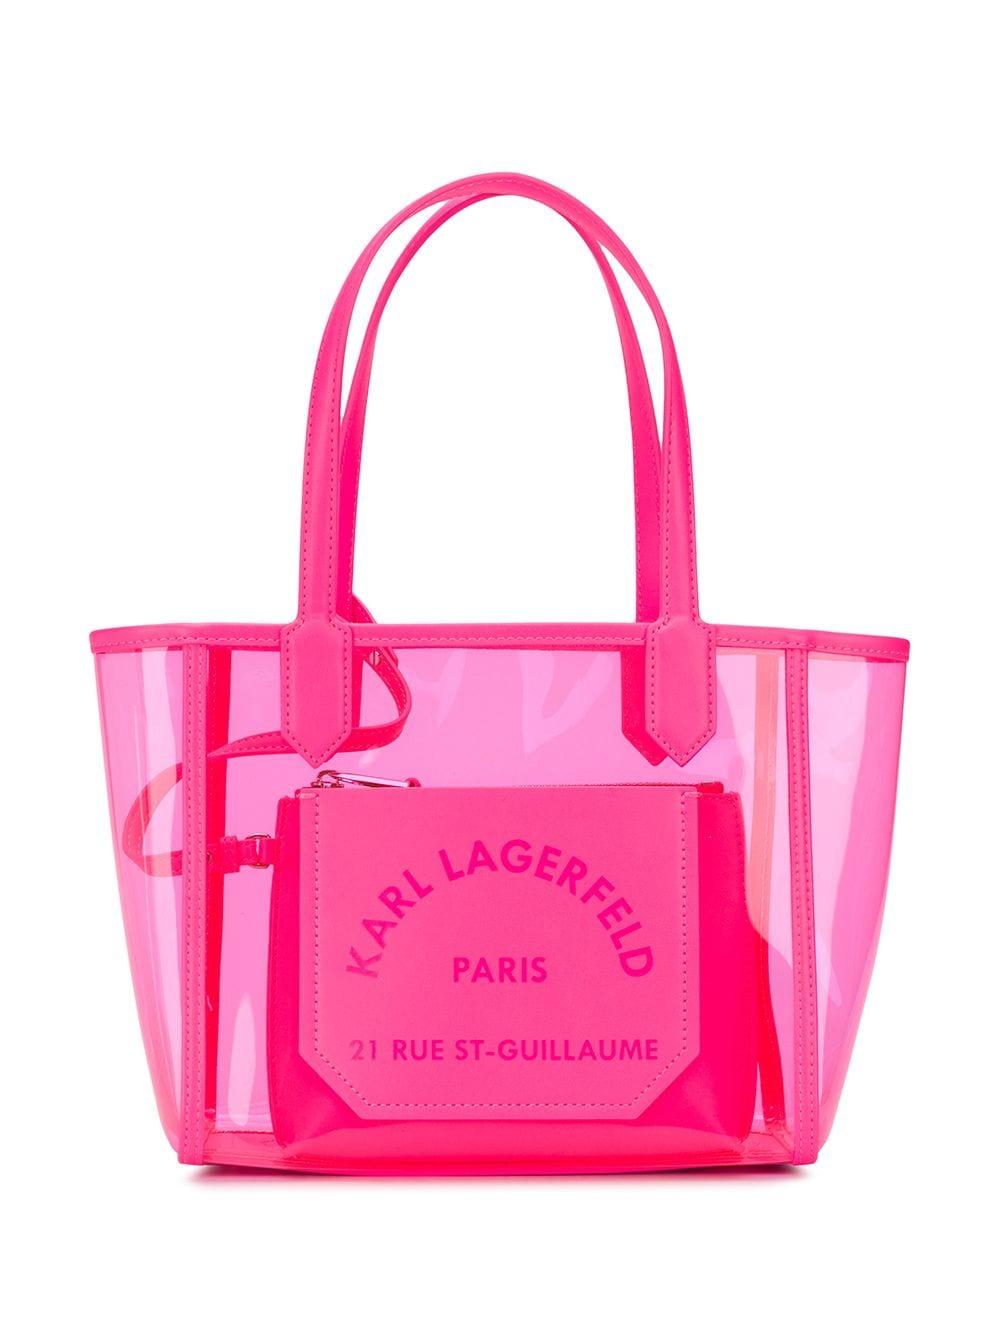 Karl Lagerfeld K/journey Transparent Small Tote in Pink - Lyst